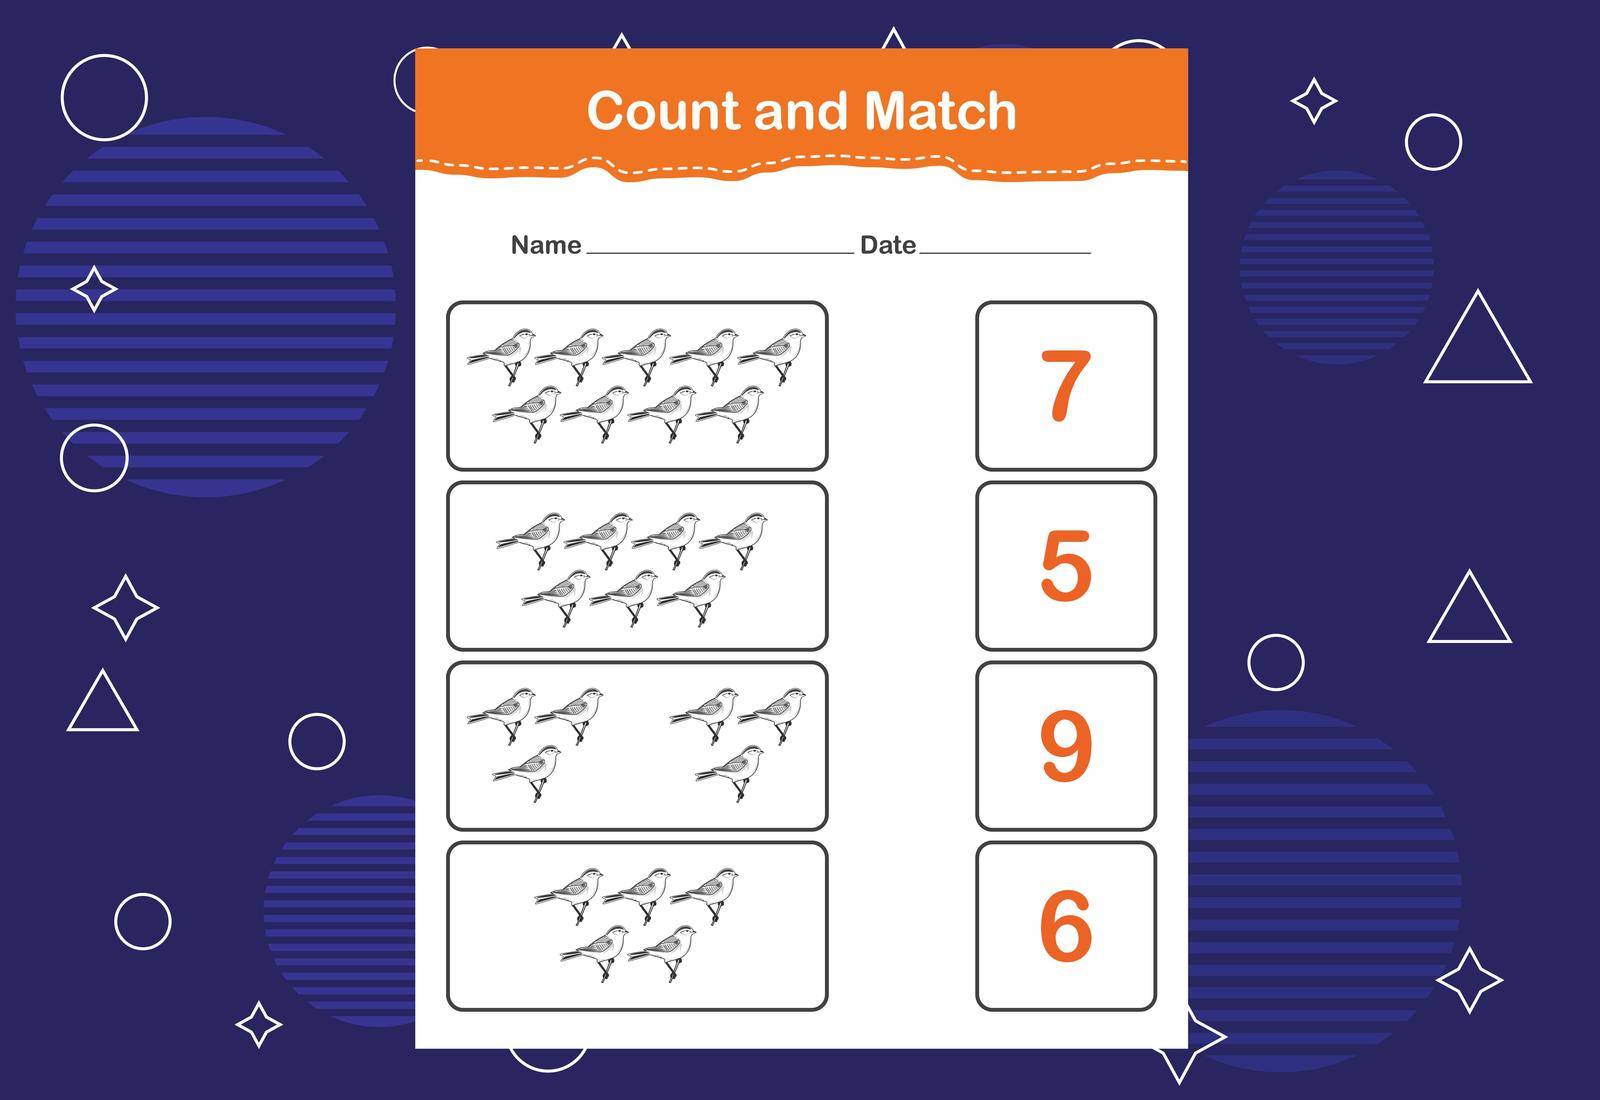 Count and match with the correct number. Count how many birds and choose the correct number by busrat